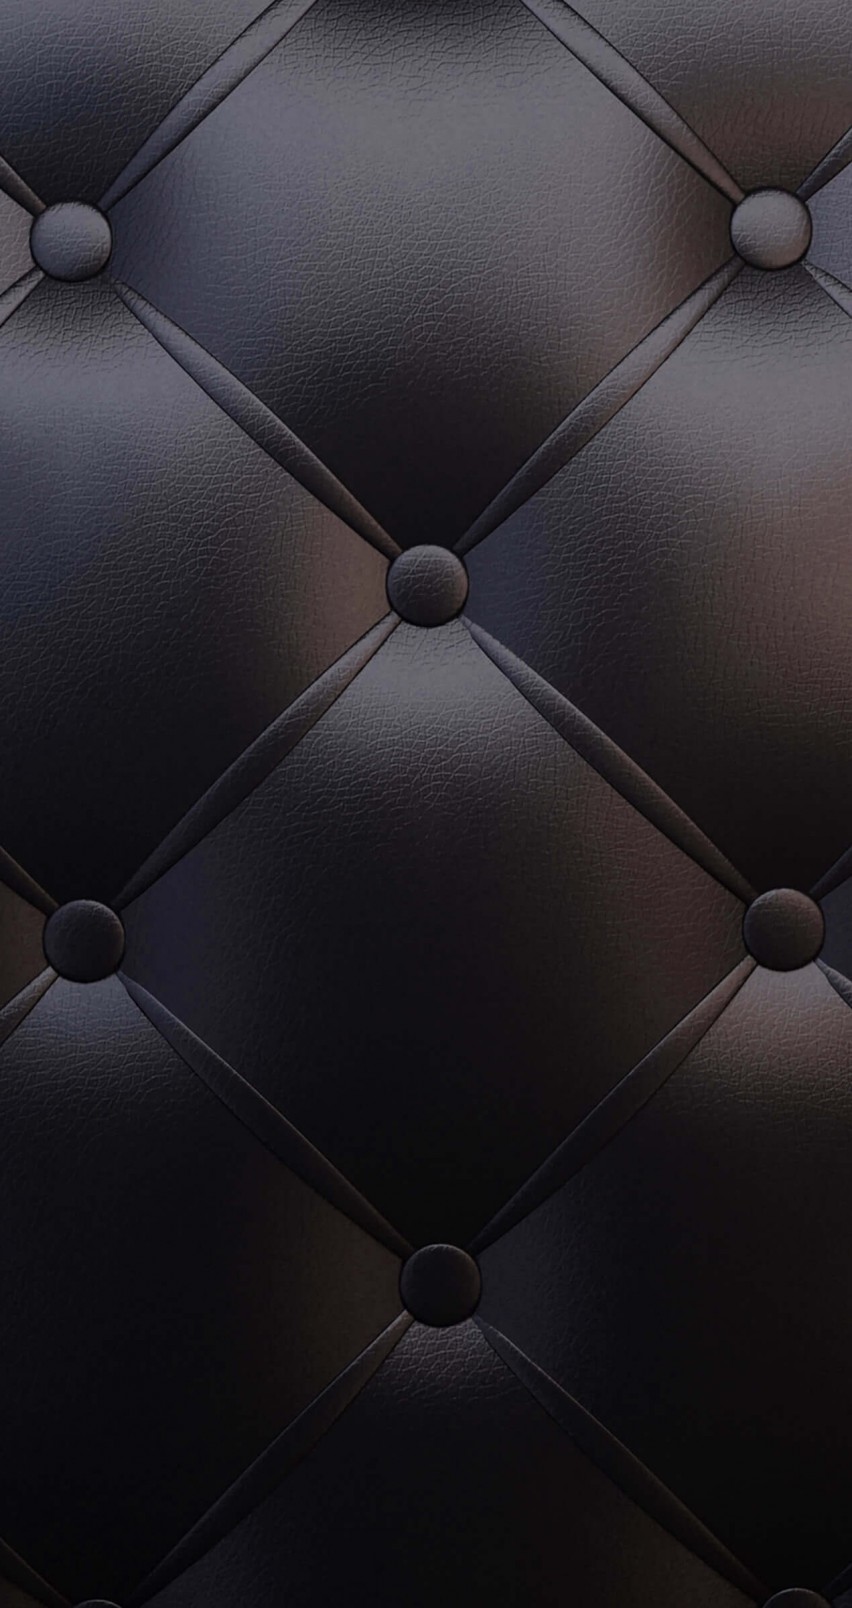 Download Black Leather Vintage Sofa HD wallpaper for iPhone 6 6s